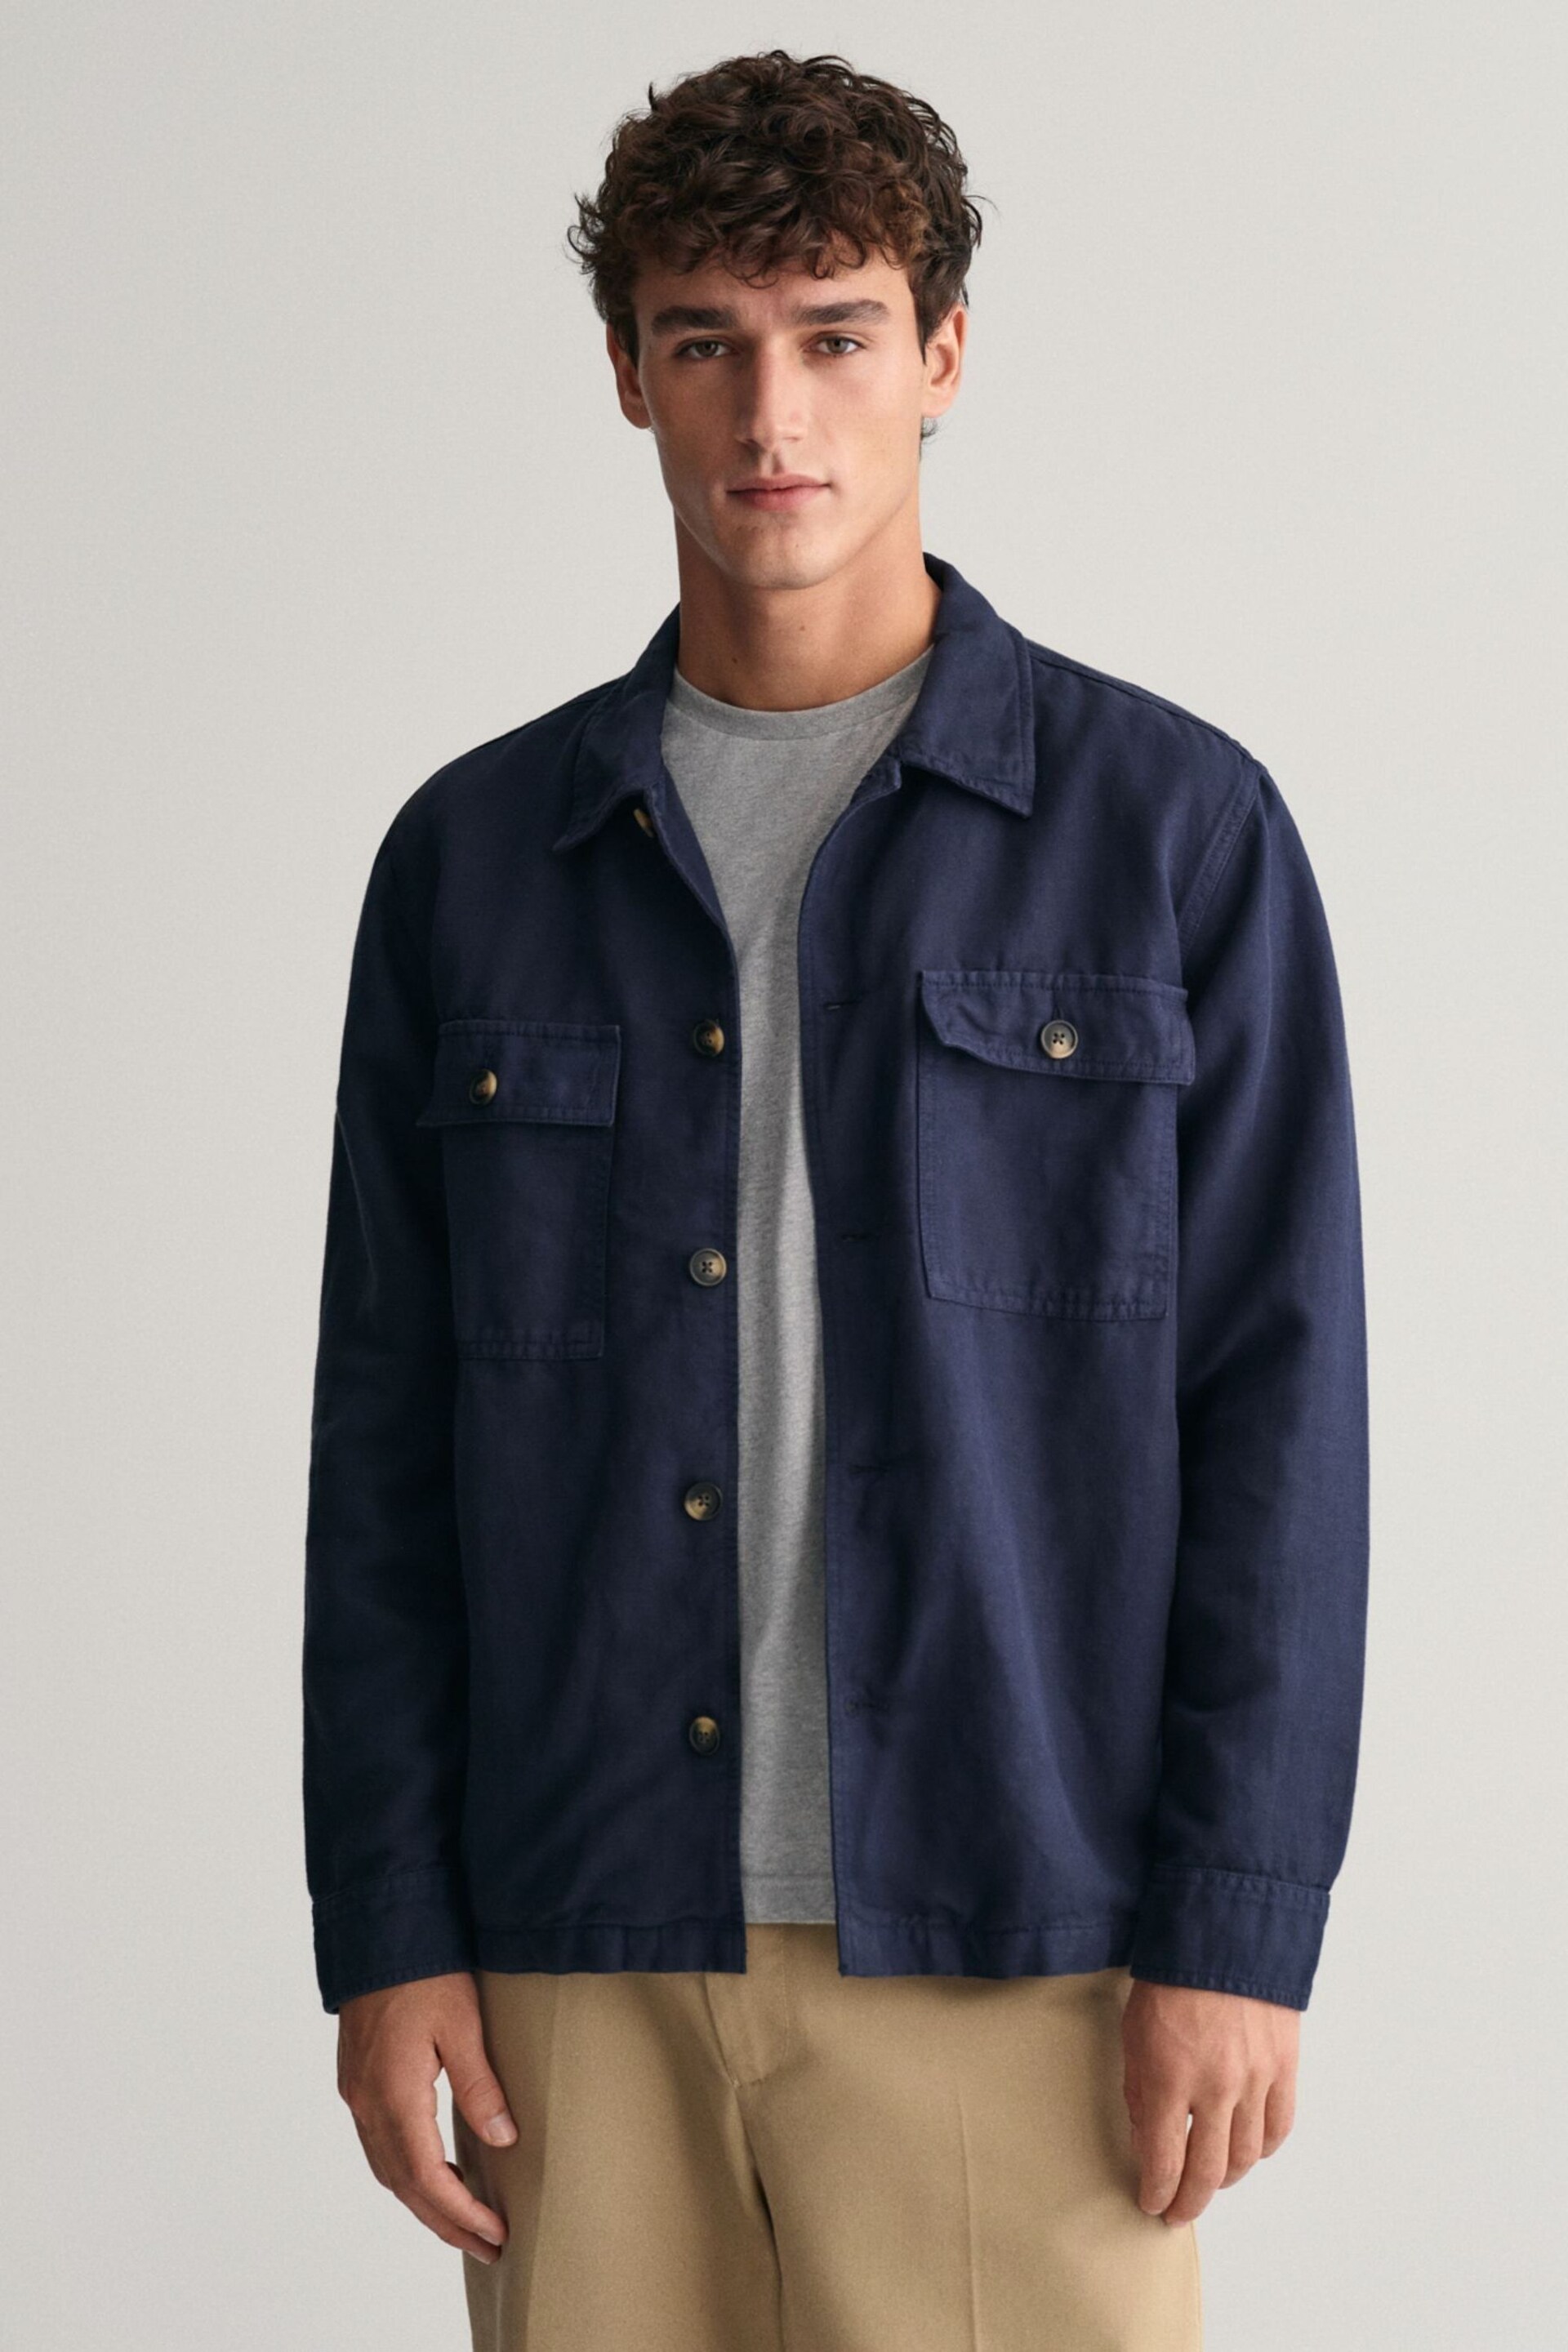 GANT Blue Relaxed Fit Cotton Linen Twill Overshirt - Image 1 of 7